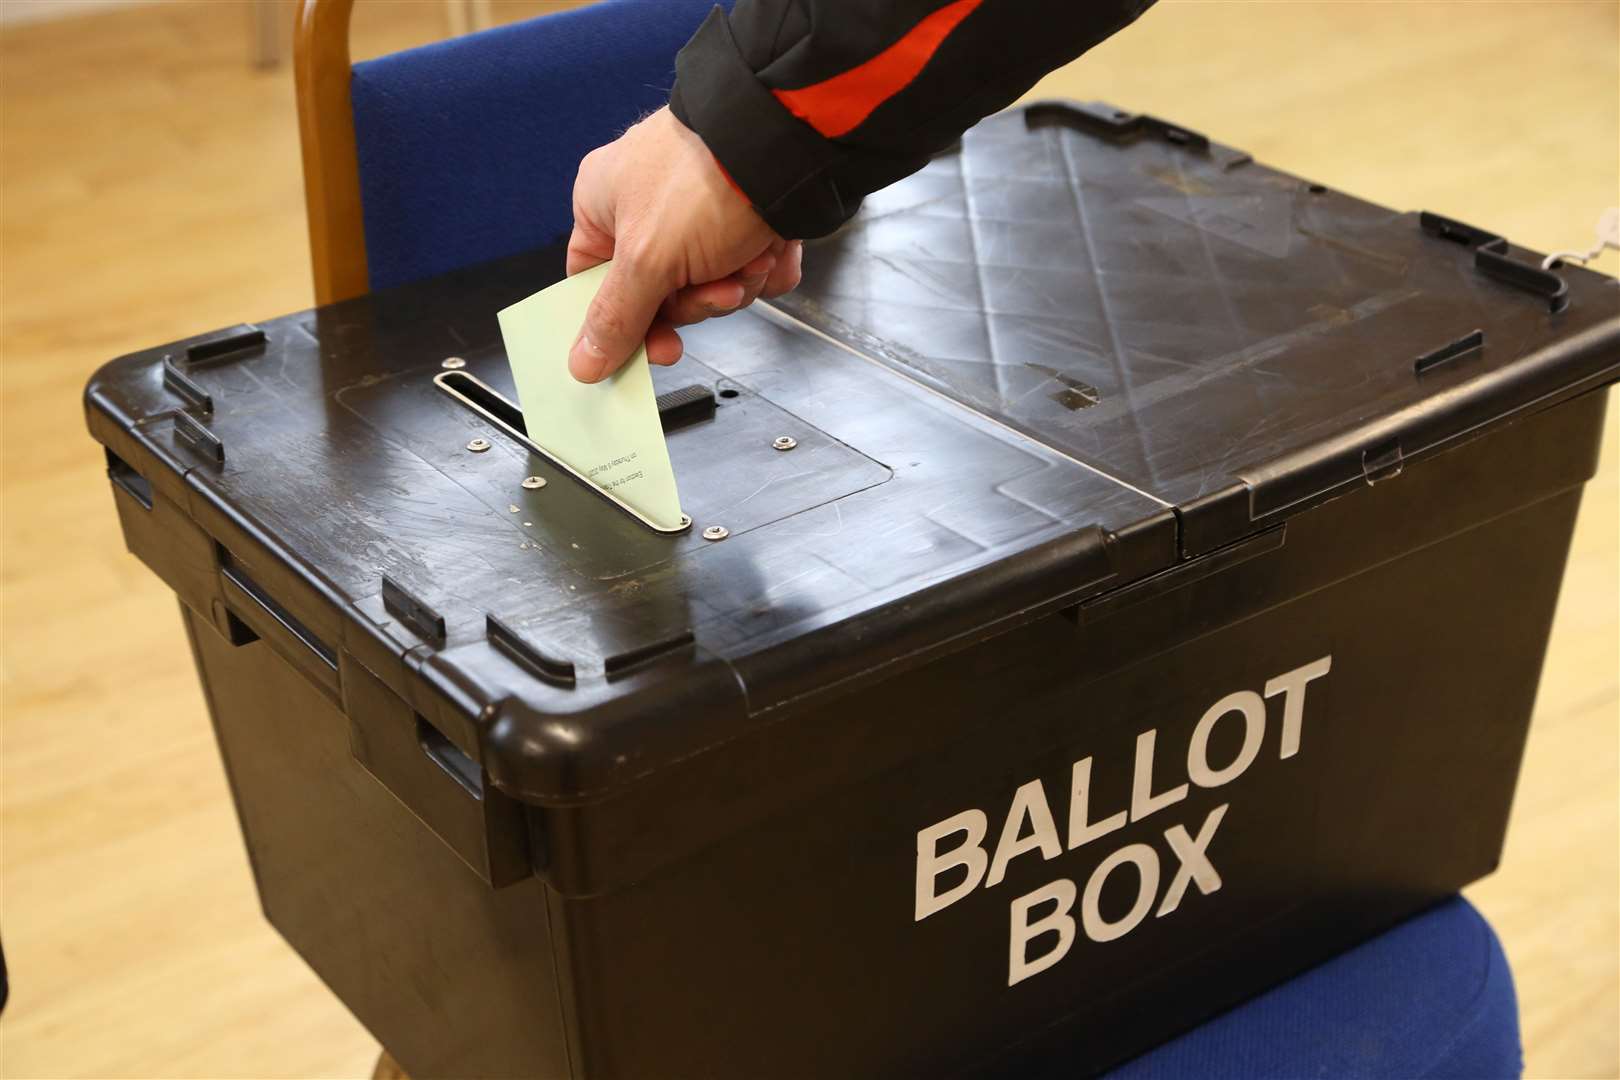 There are fears voter turnout could be lower than usual. Stock picture: Chris Loades